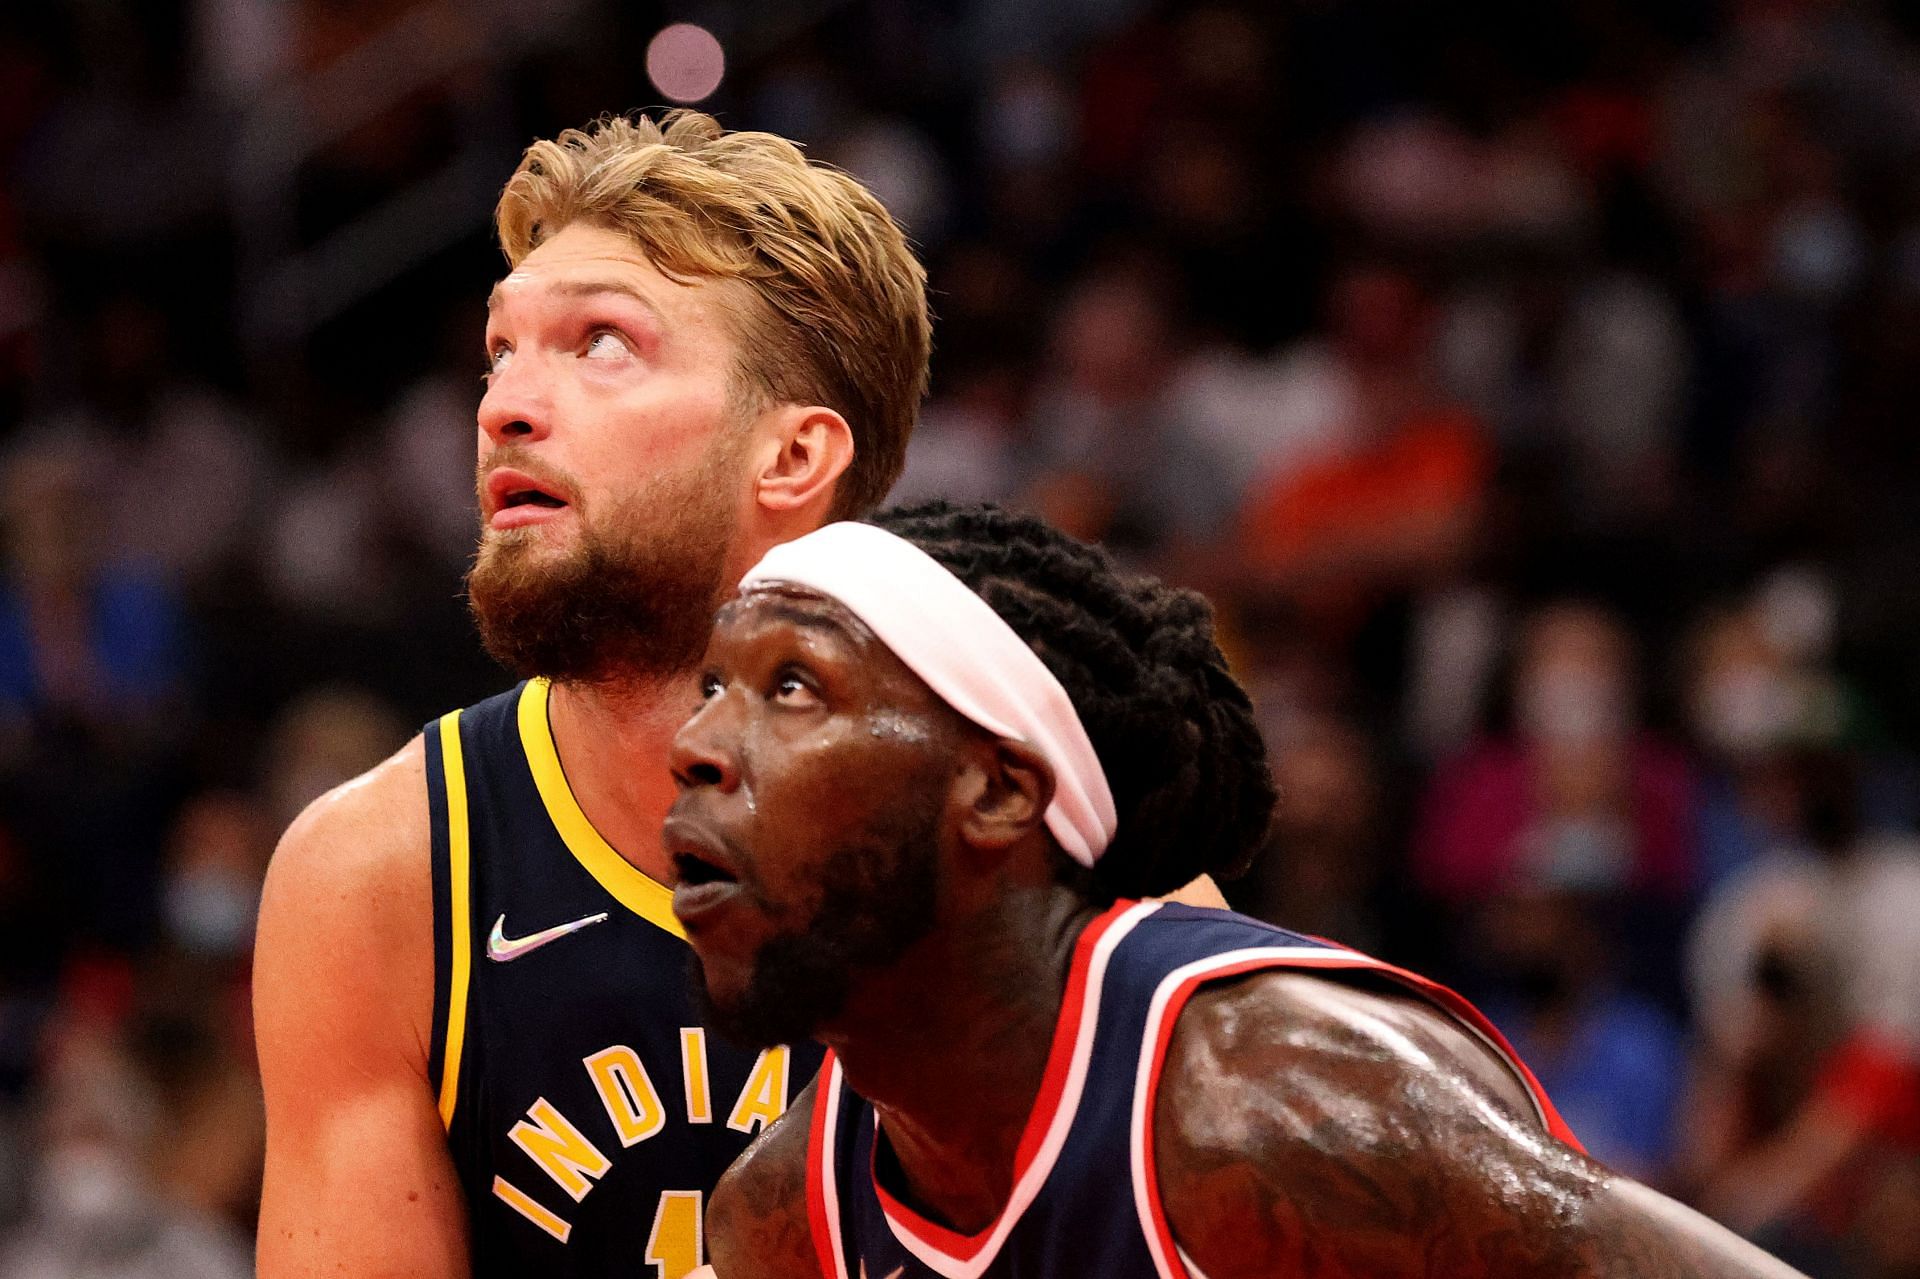 Domantas Sabonis of the Indiana Pacers and Montrezl Harrell of the Washington Wizards